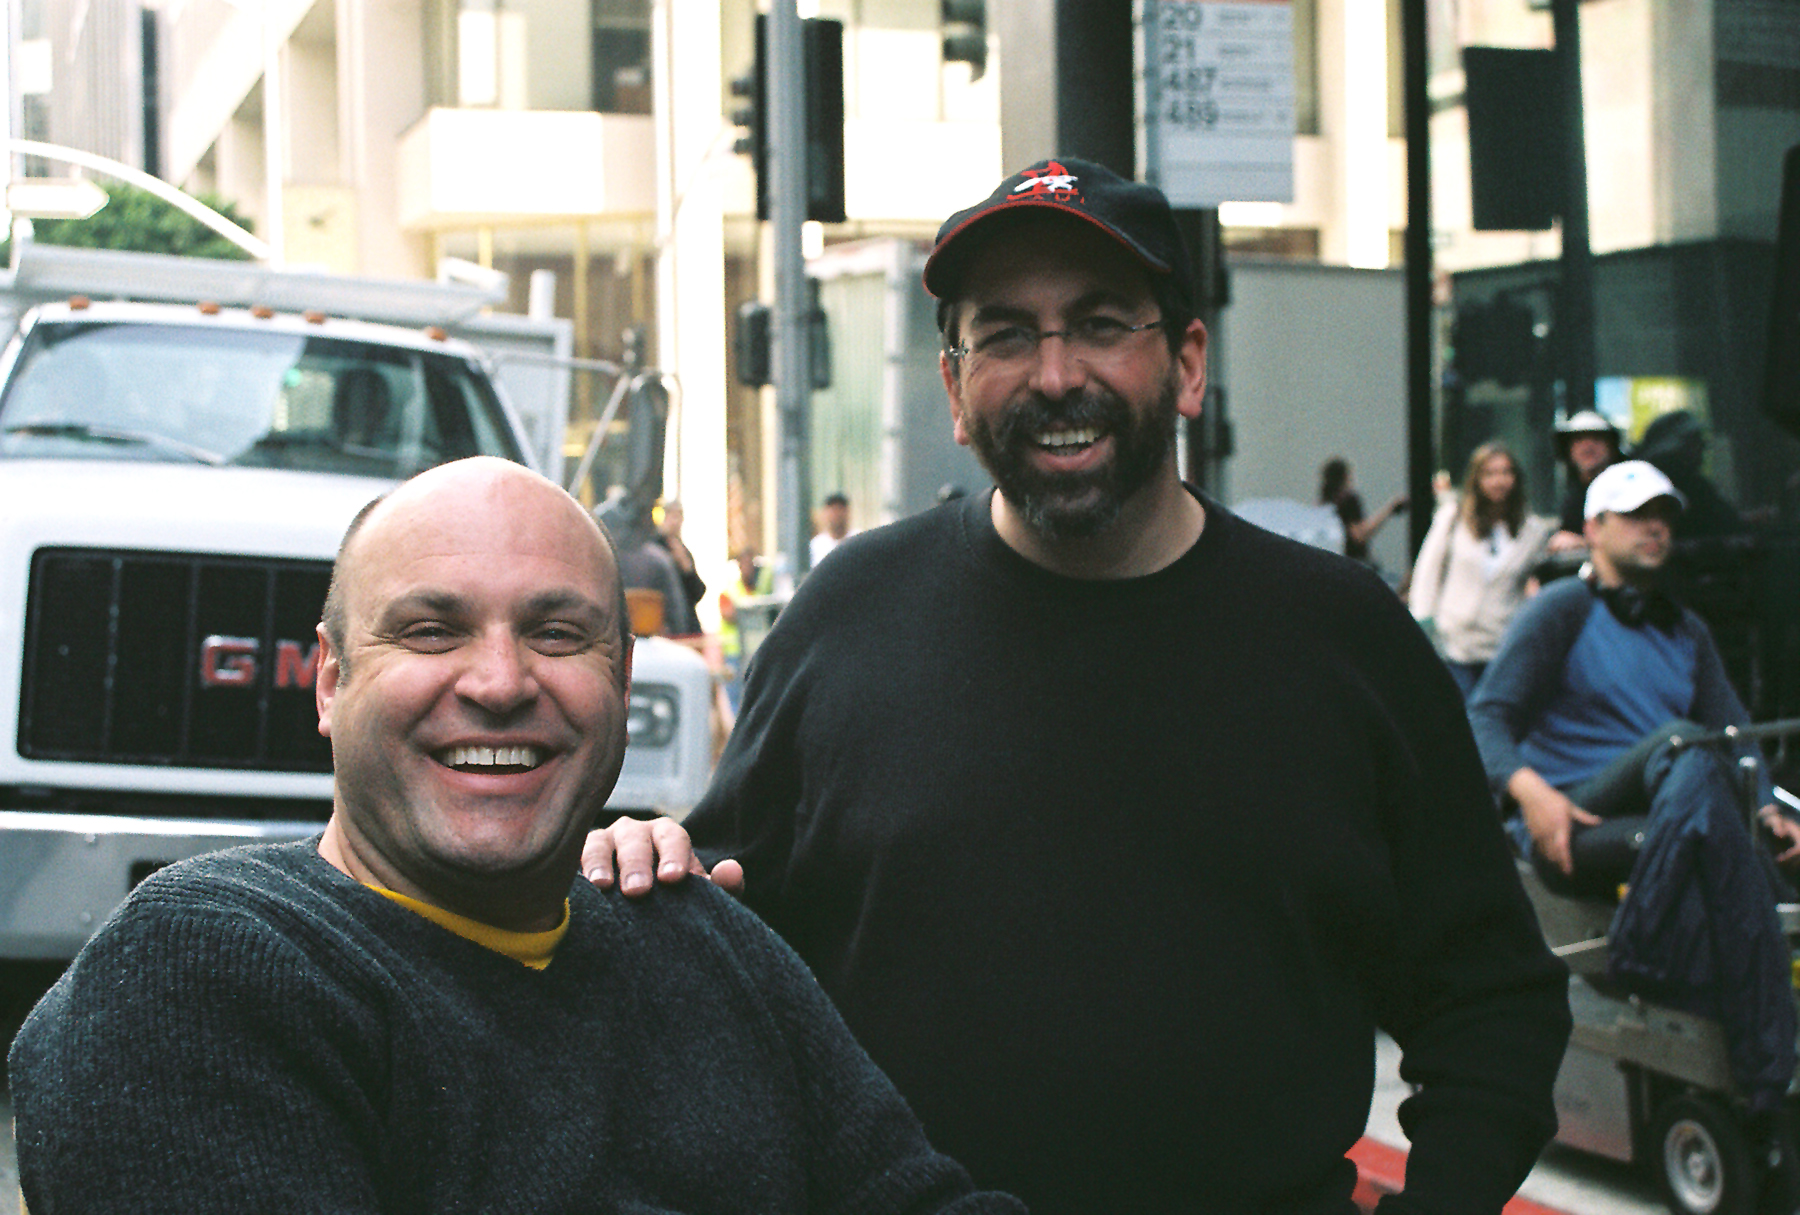 Mike Elliott (left) and William Widmaier (right) on the set of Jessica Alba starer 